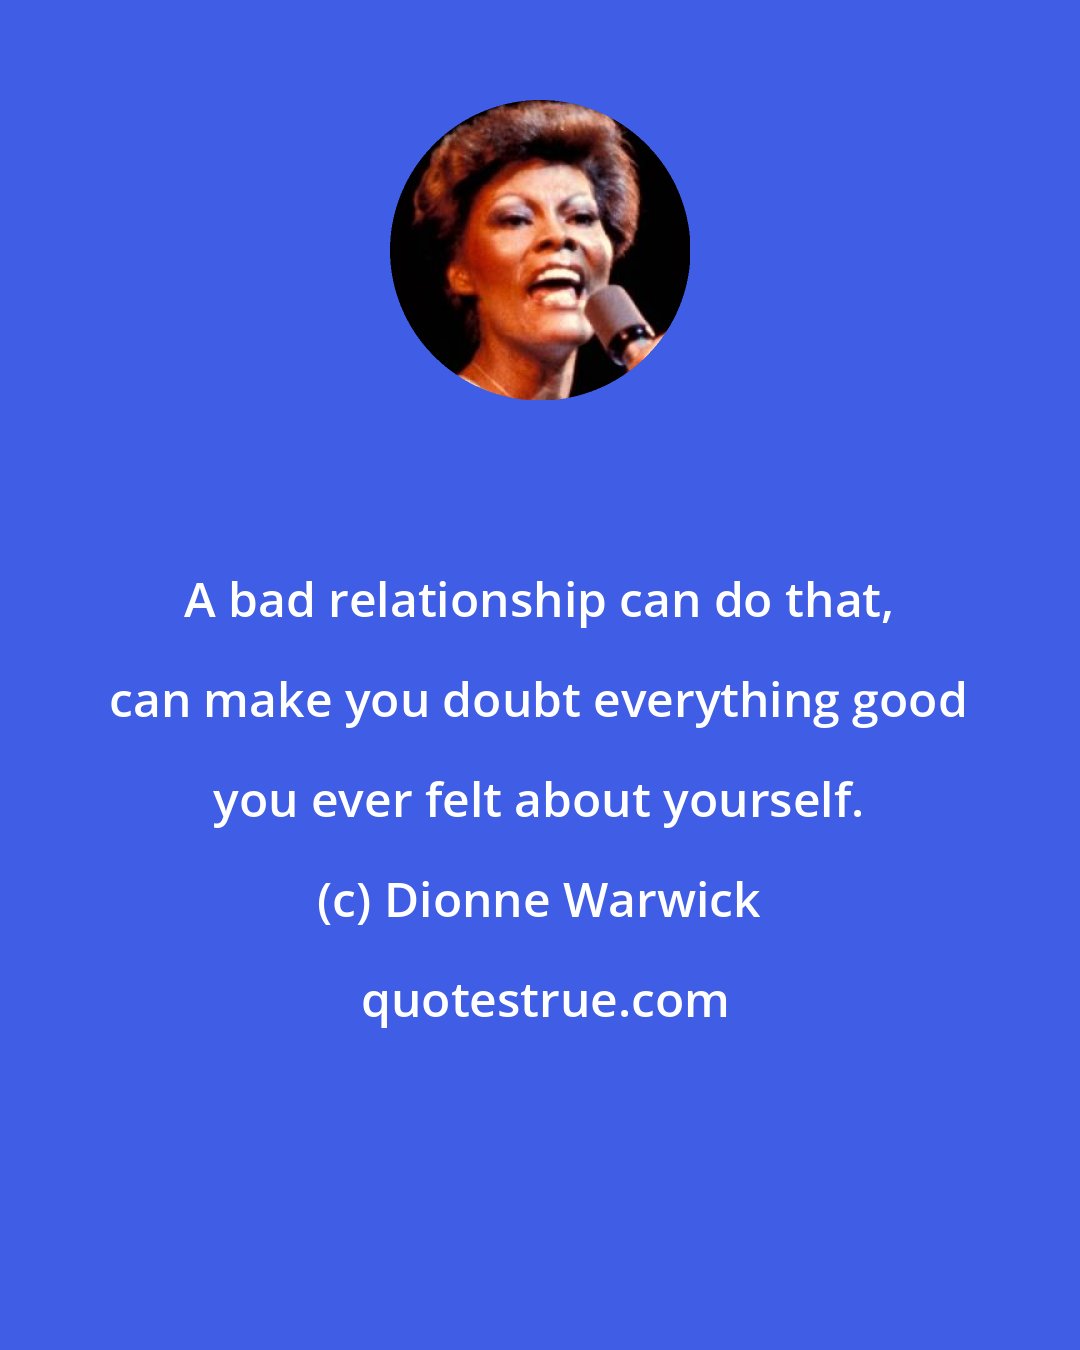 Dionne Warwick: A bad relationship can do that, can make you doubt everything good you ever felt about yourself.